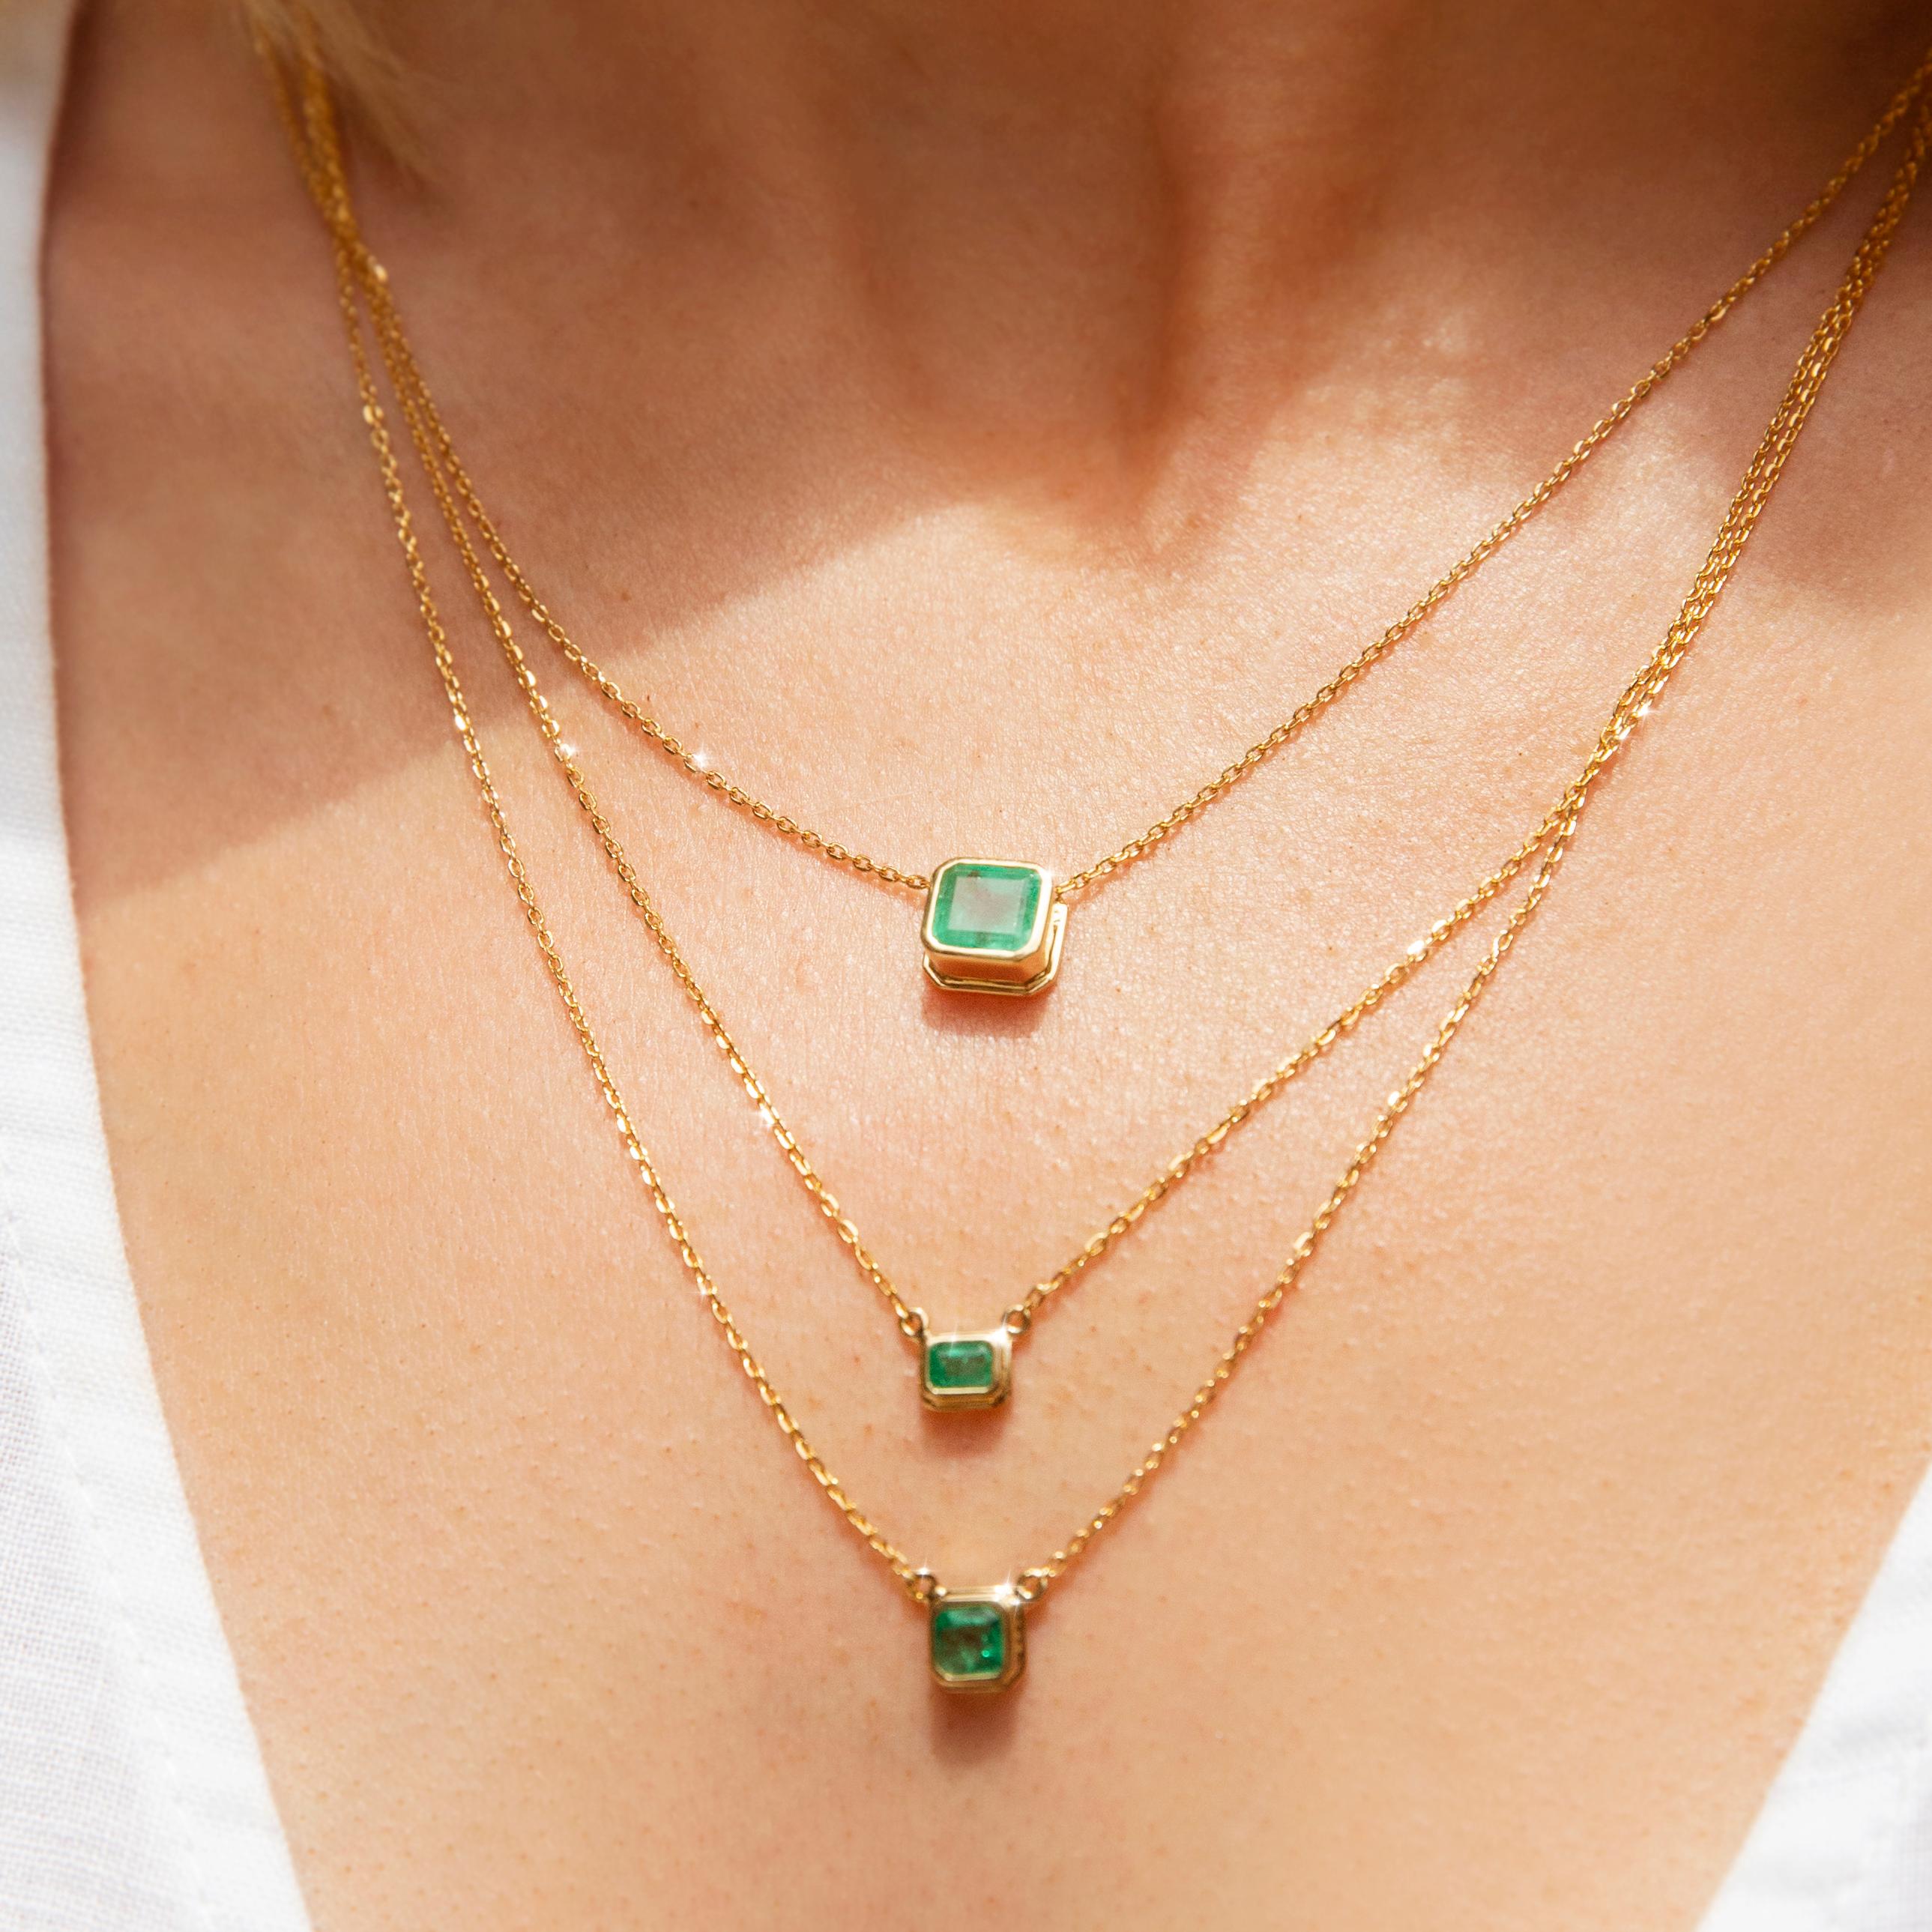 Crafted in 18 carat gold, the charming necklet features a graceful fine chain holding a lovely bright square cut emerald in a bezel setting. Her name is The Petunia Pendant. She is light and comfortable to wear and a perfect choice for lovers of